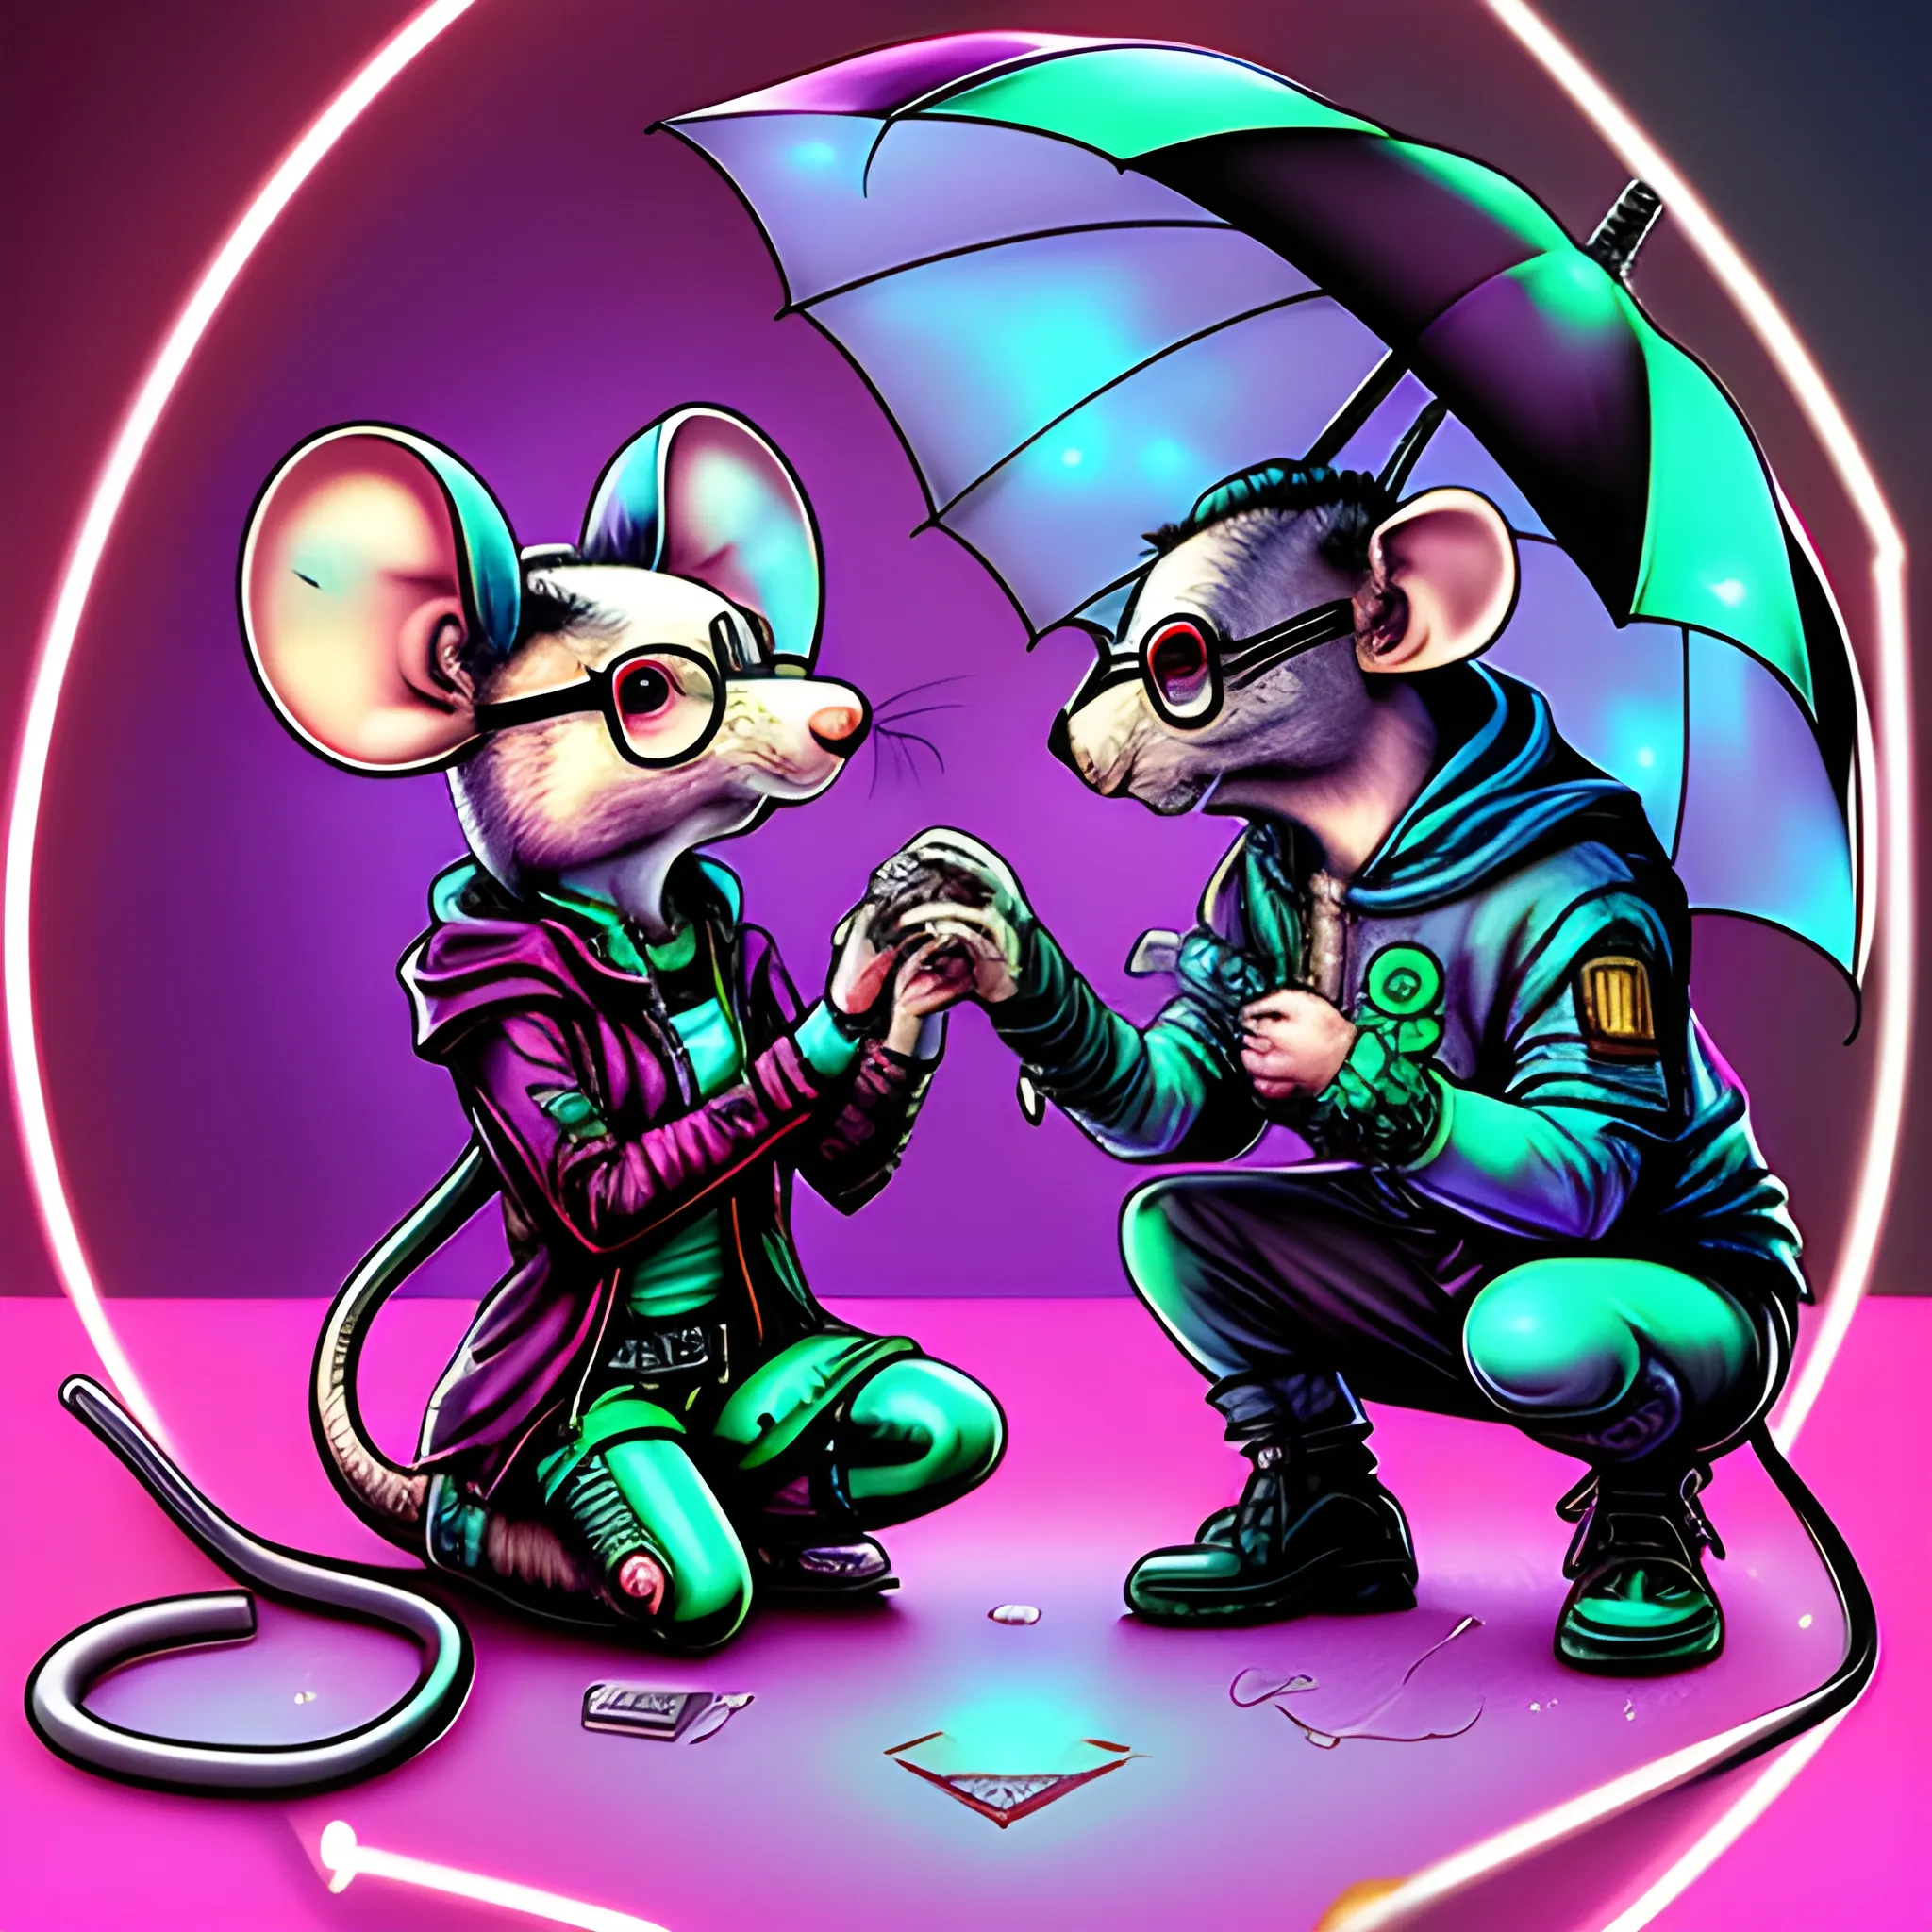 

cyberpunk, mouse, with glasses, on knees, gives engagement ring to cyberpunk rat female, with umbrella, background clear, Trippy